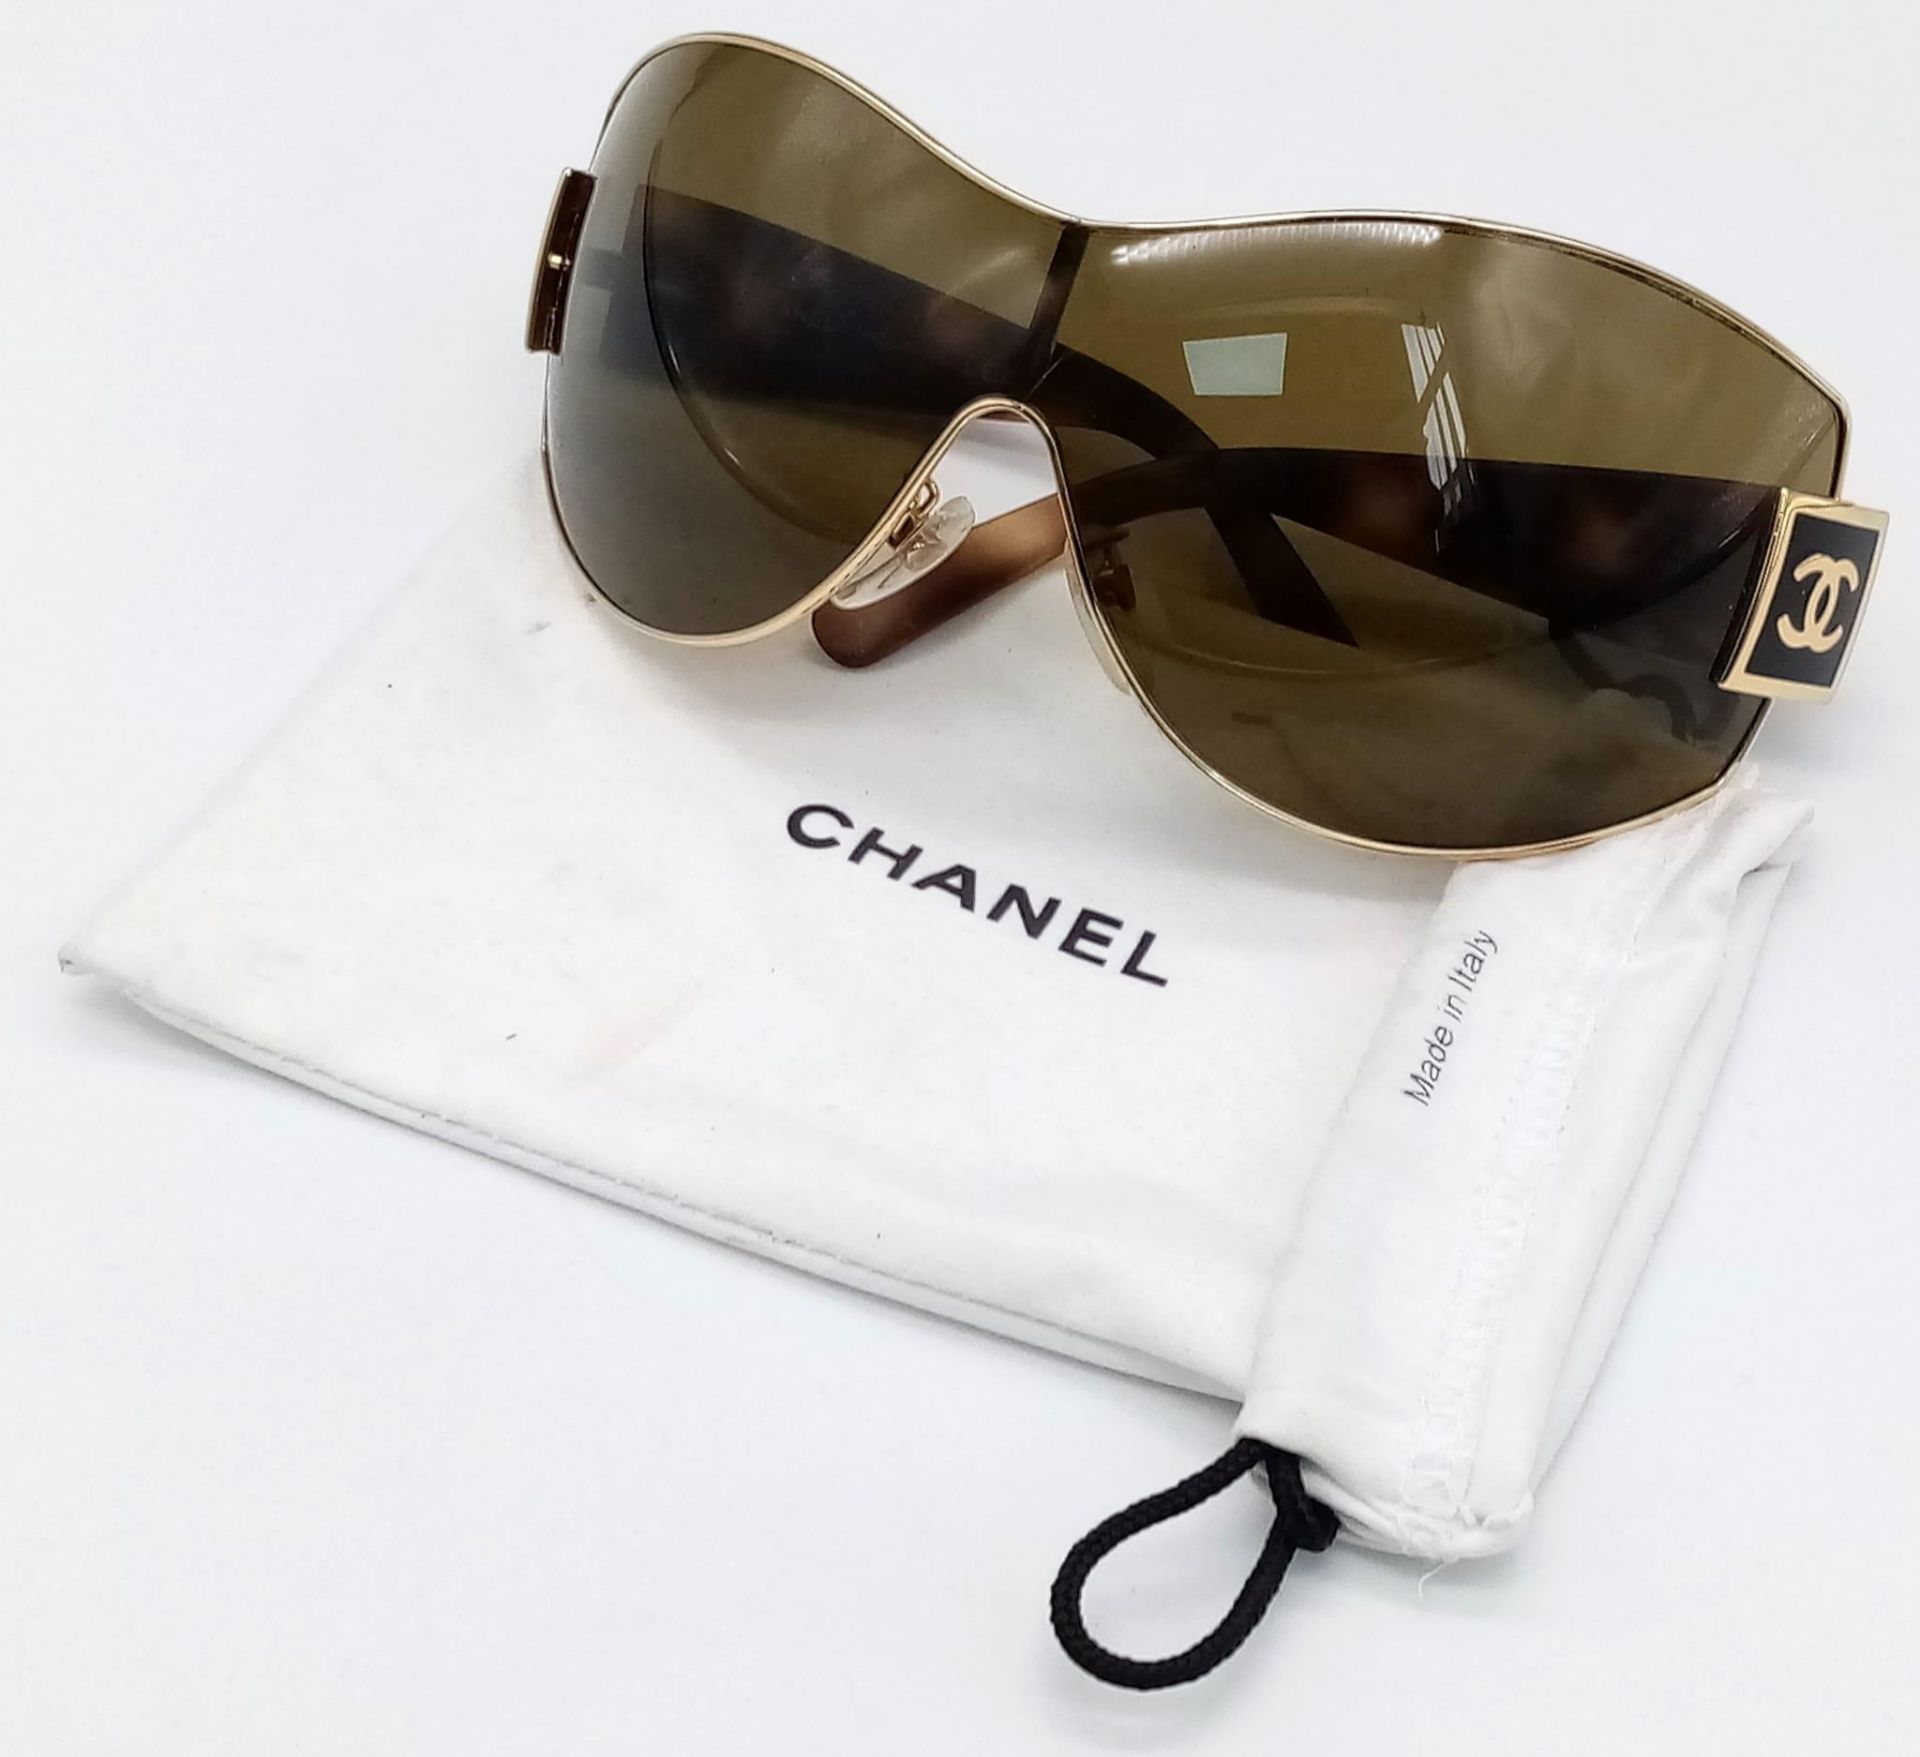 A Pair of Ladies Chanel Sunglasses with Chanel Pouch. Ref: 12750